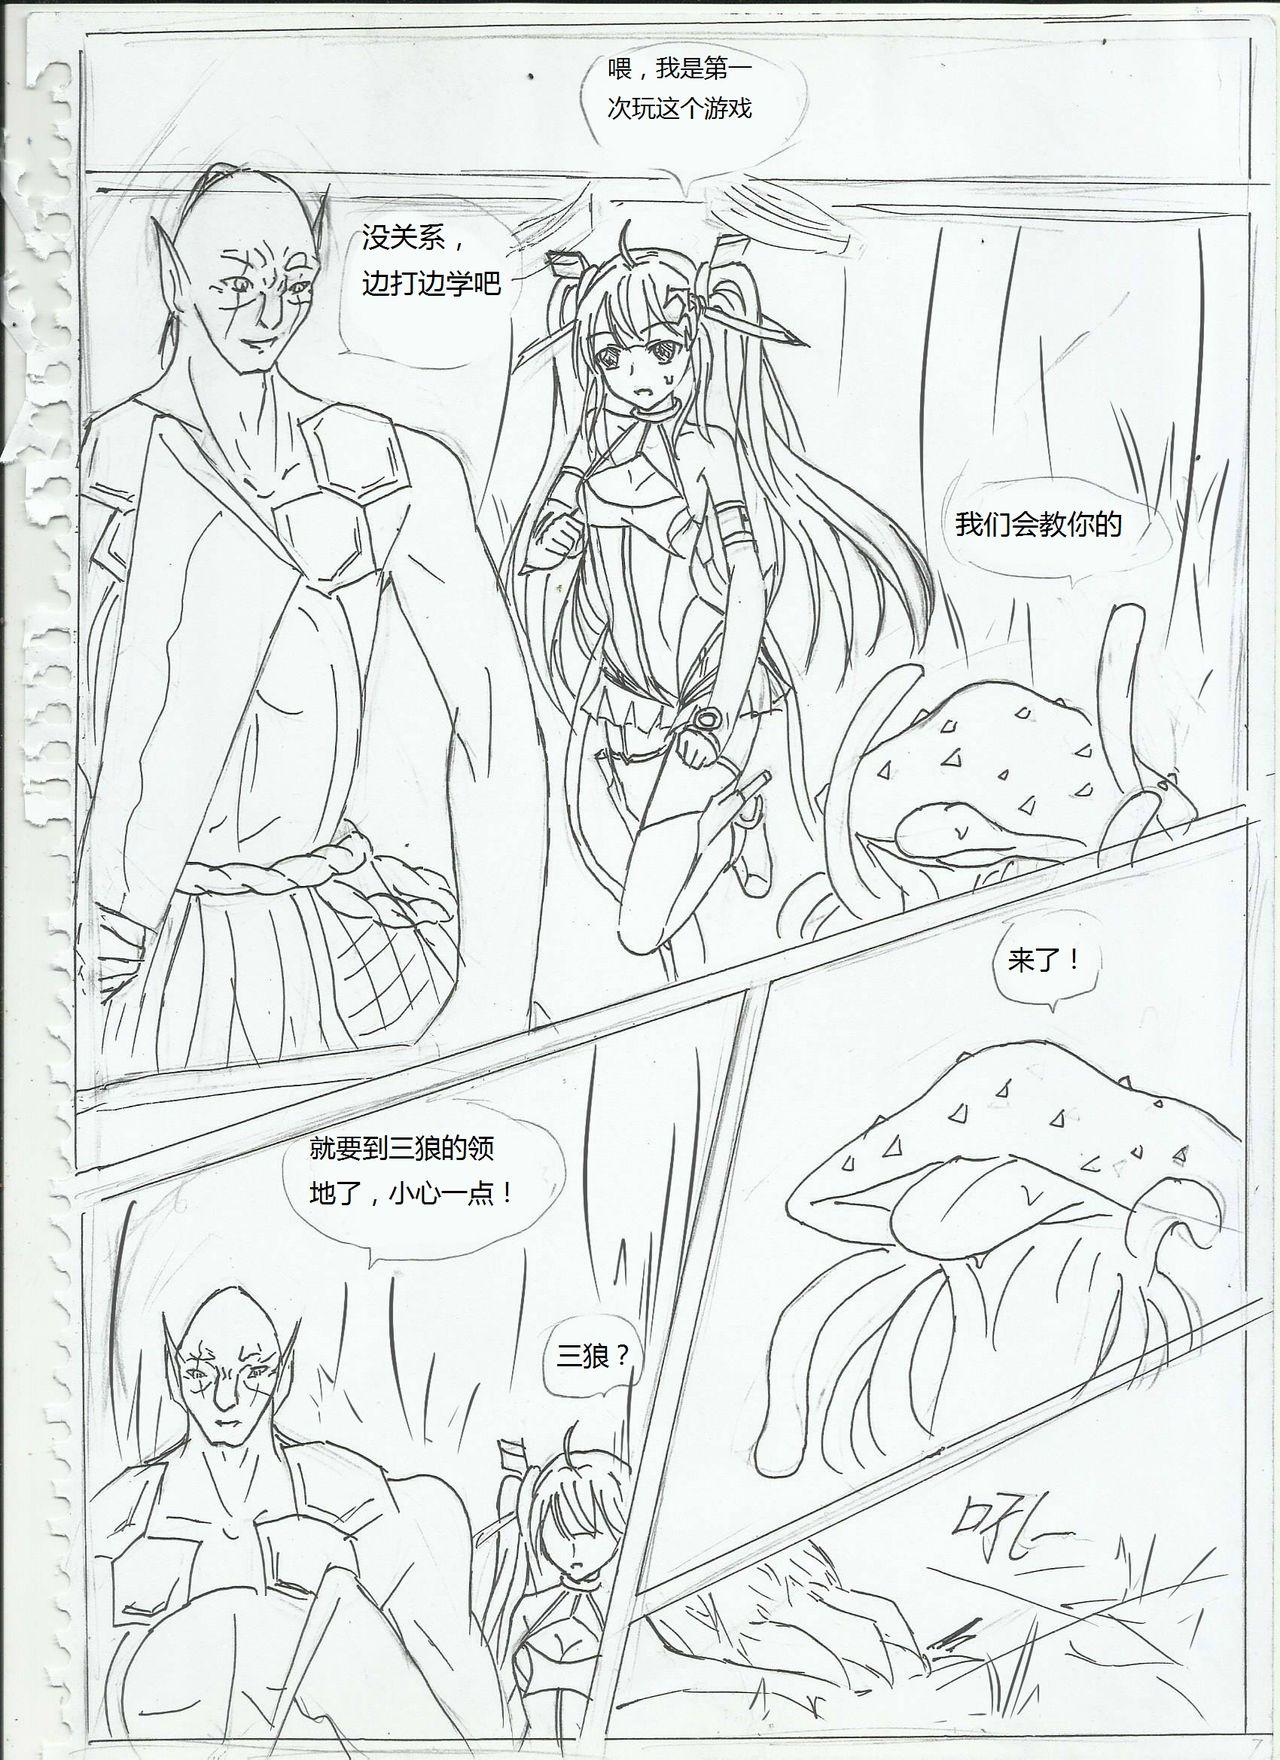 Pay 300娘（蒂塔） Doggystyle - Page 9